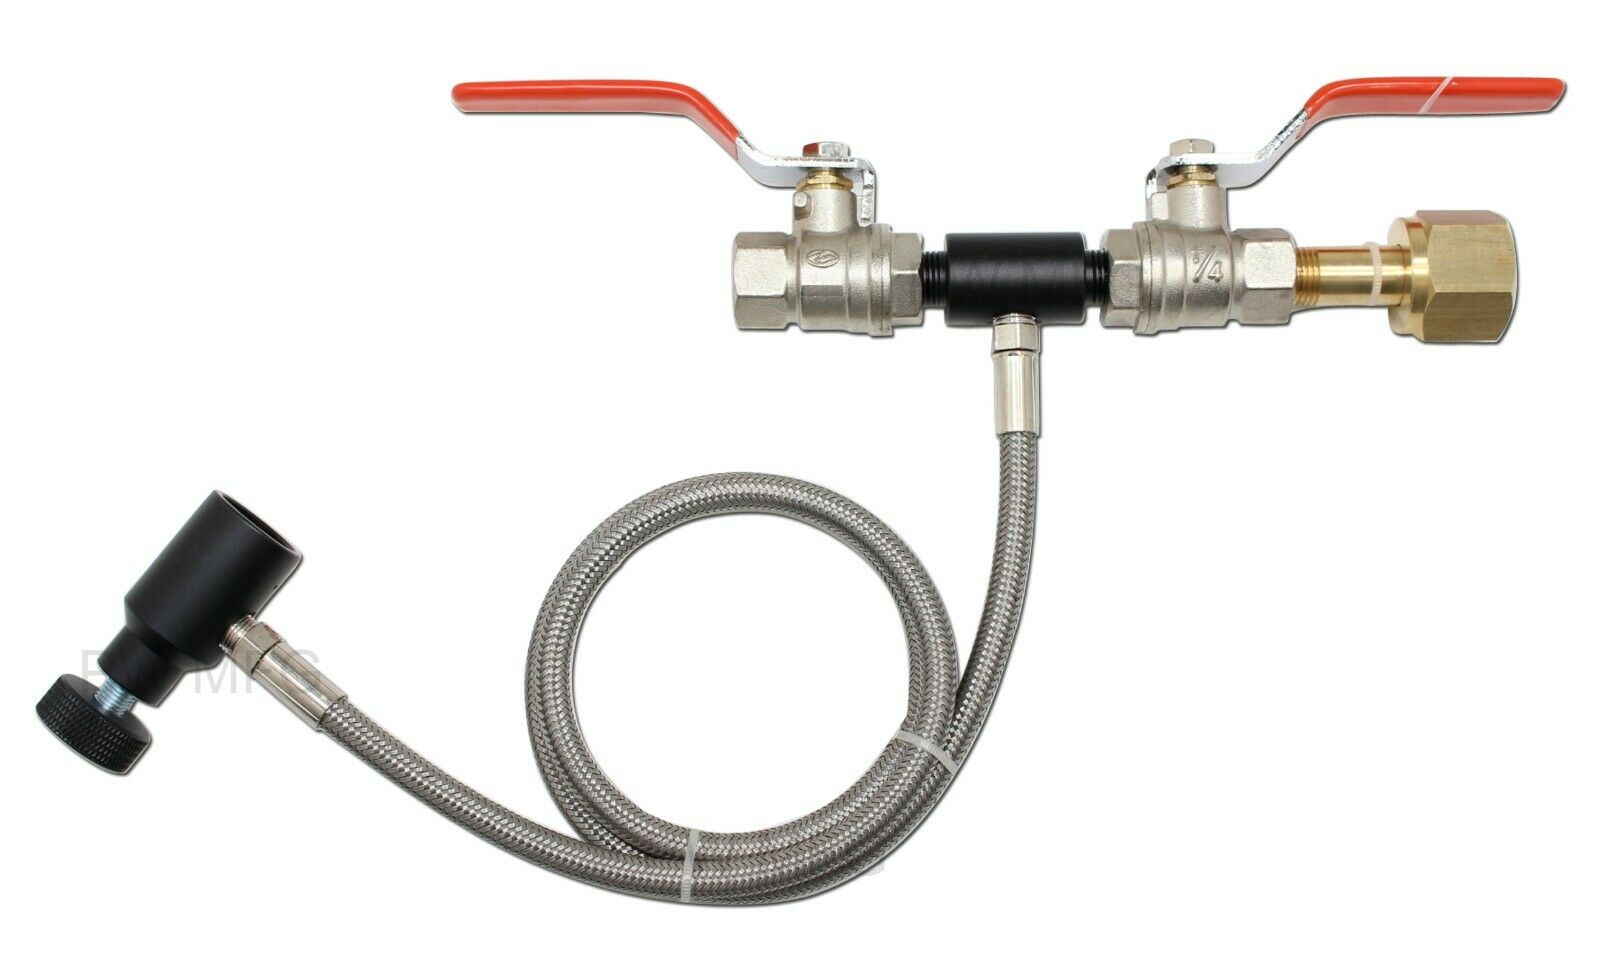 G7 Co2 Fill Station Paintball Dual Valve Lever 36" Hose Stainless Braided